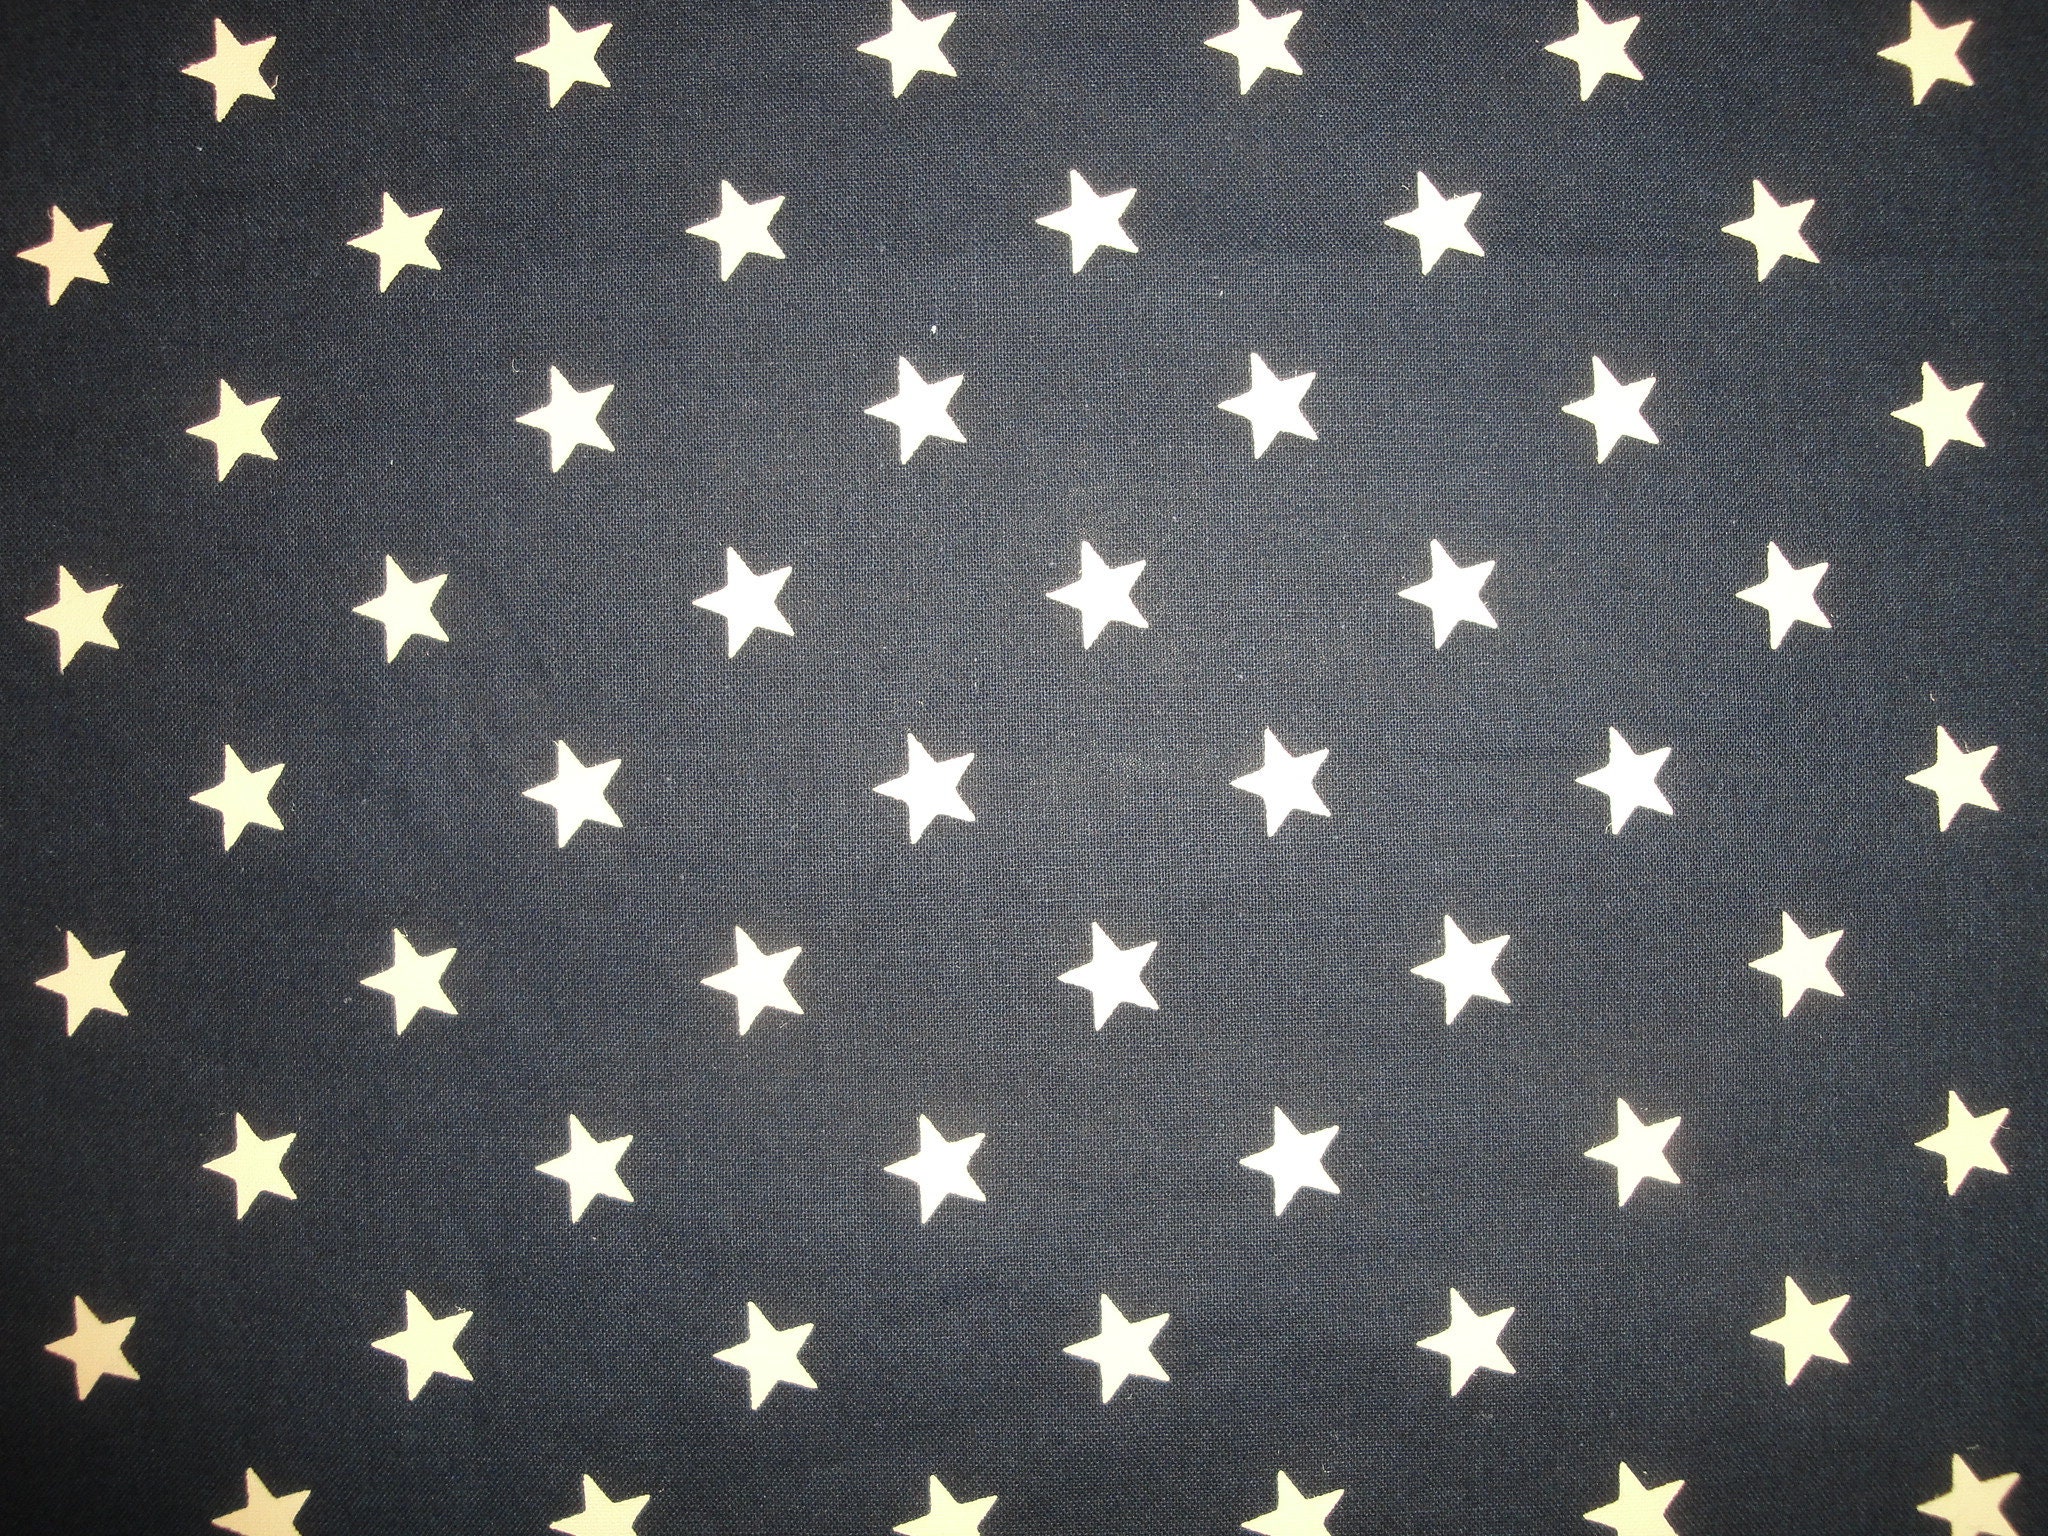 Silver Star Fabric, Wallpaper and Home Decor